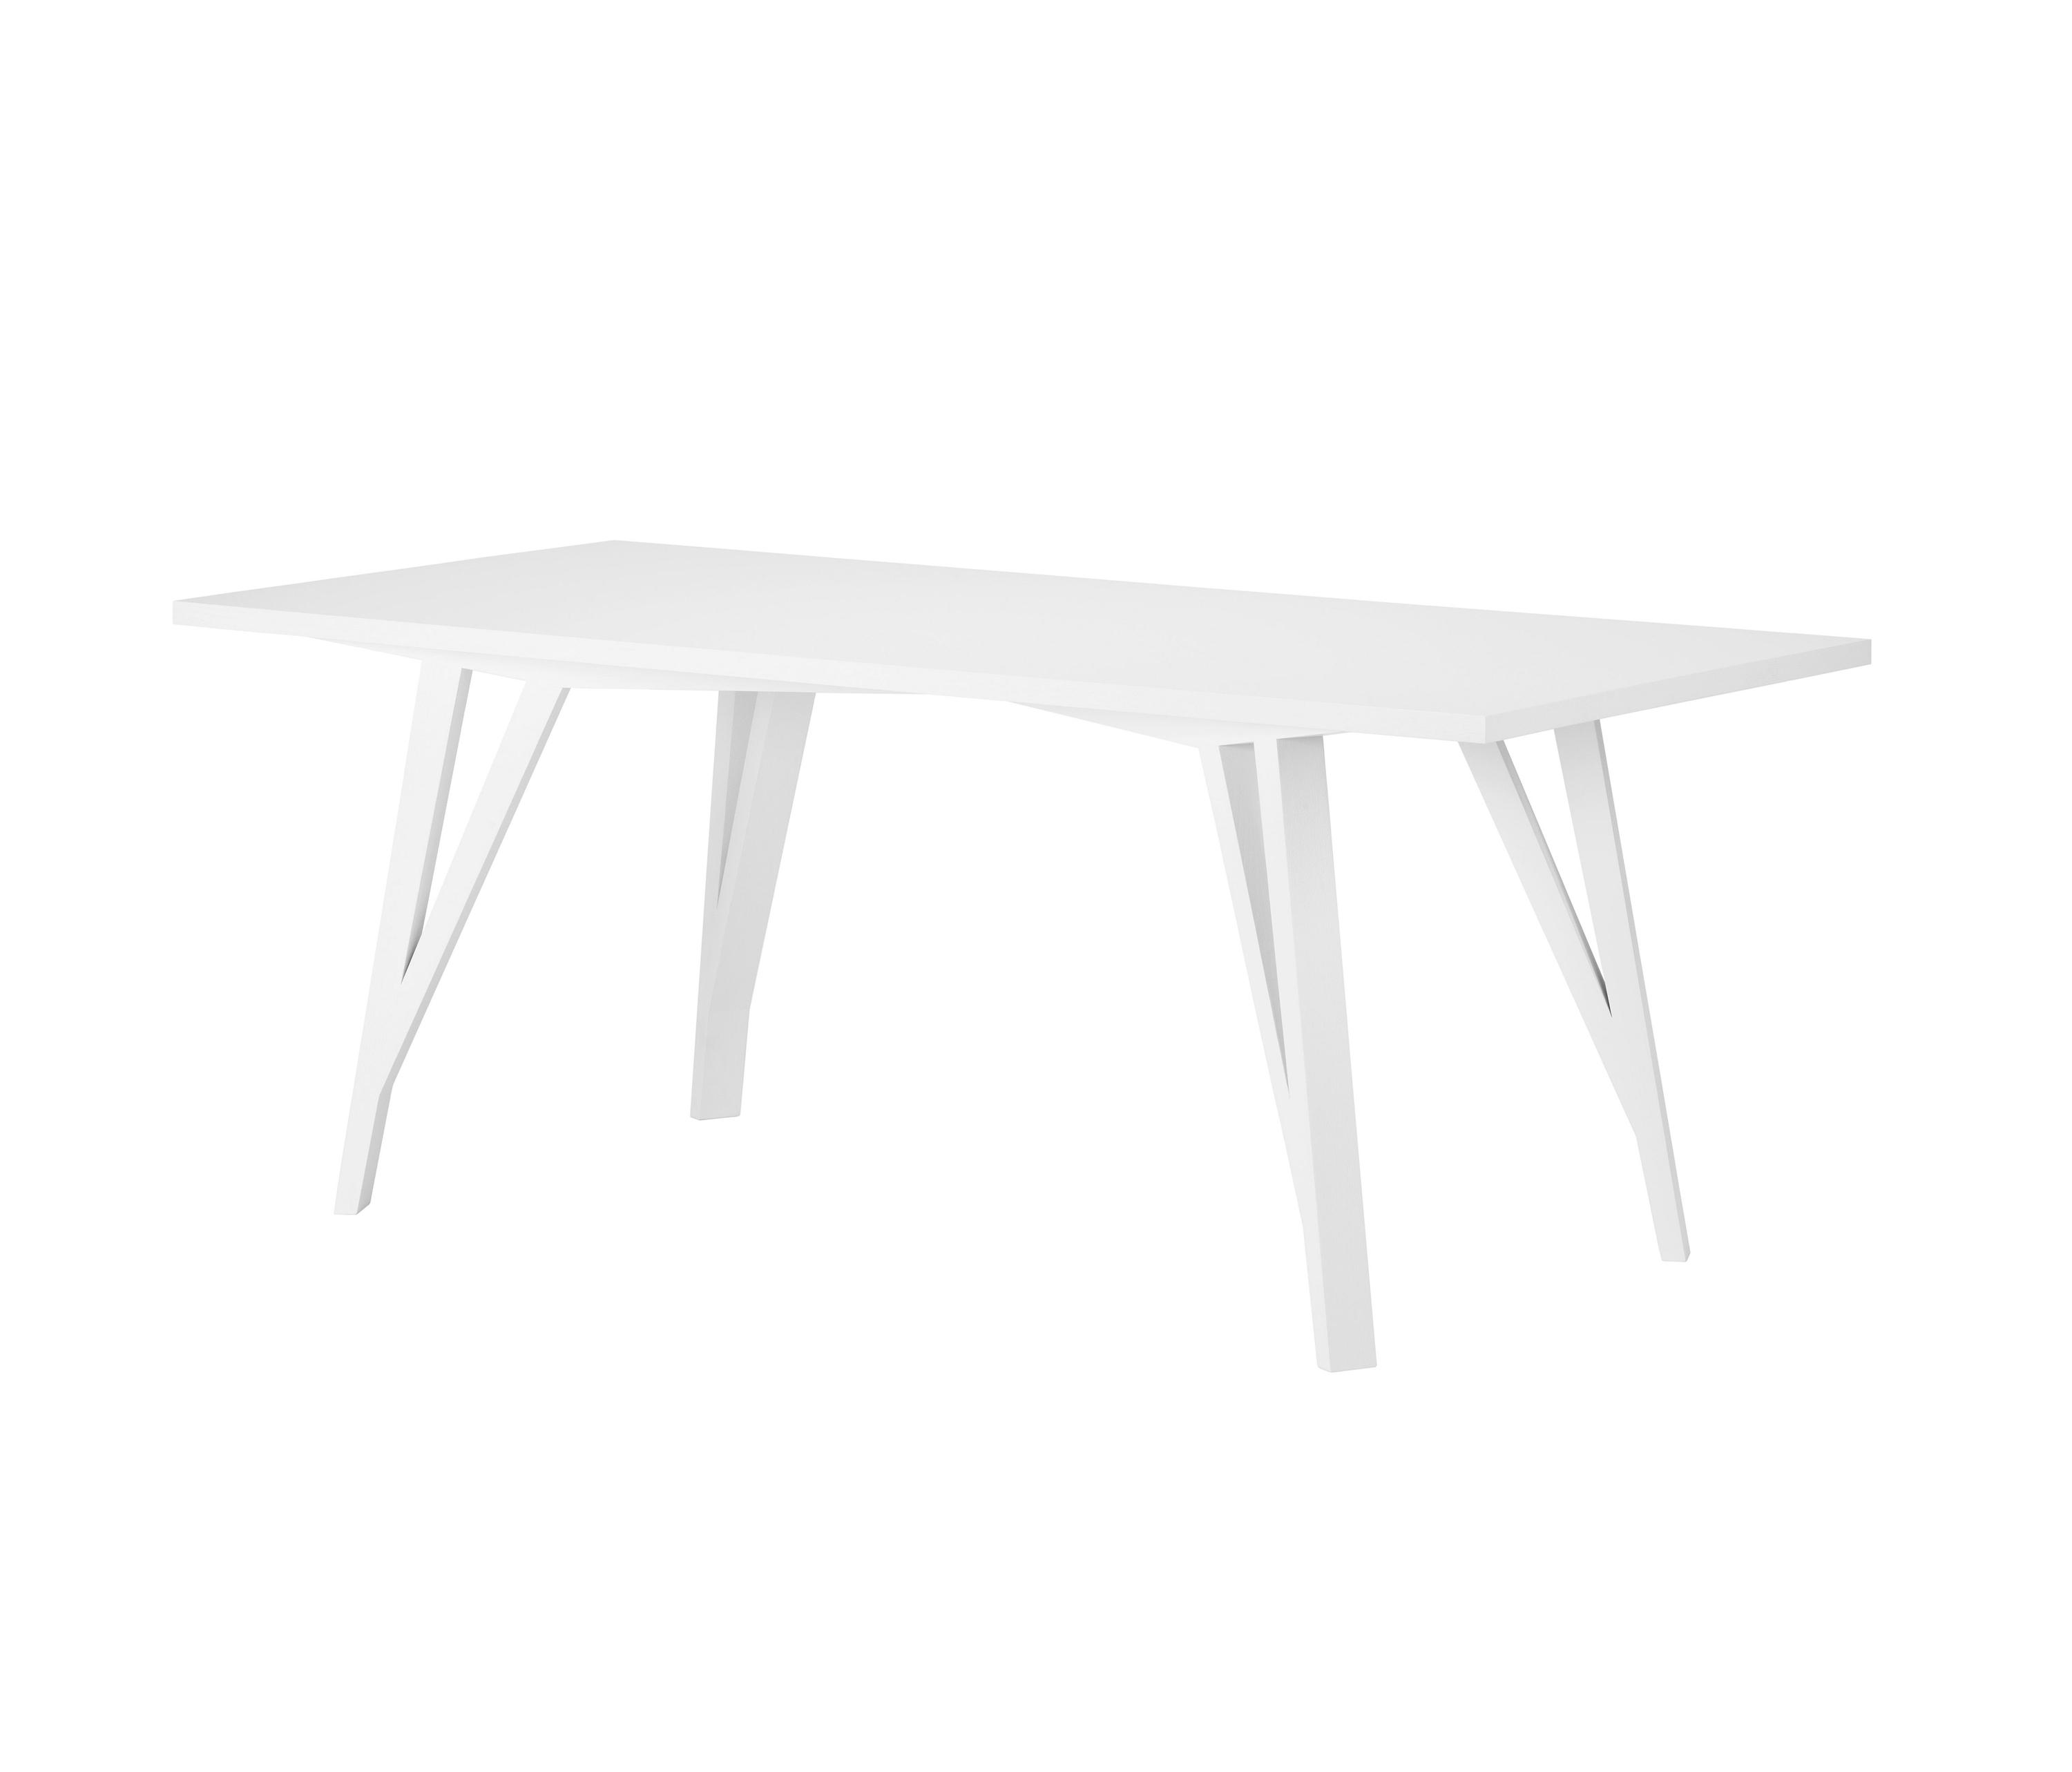 JL5 SABETH - Restaurant tables from LOEHR | Architonic